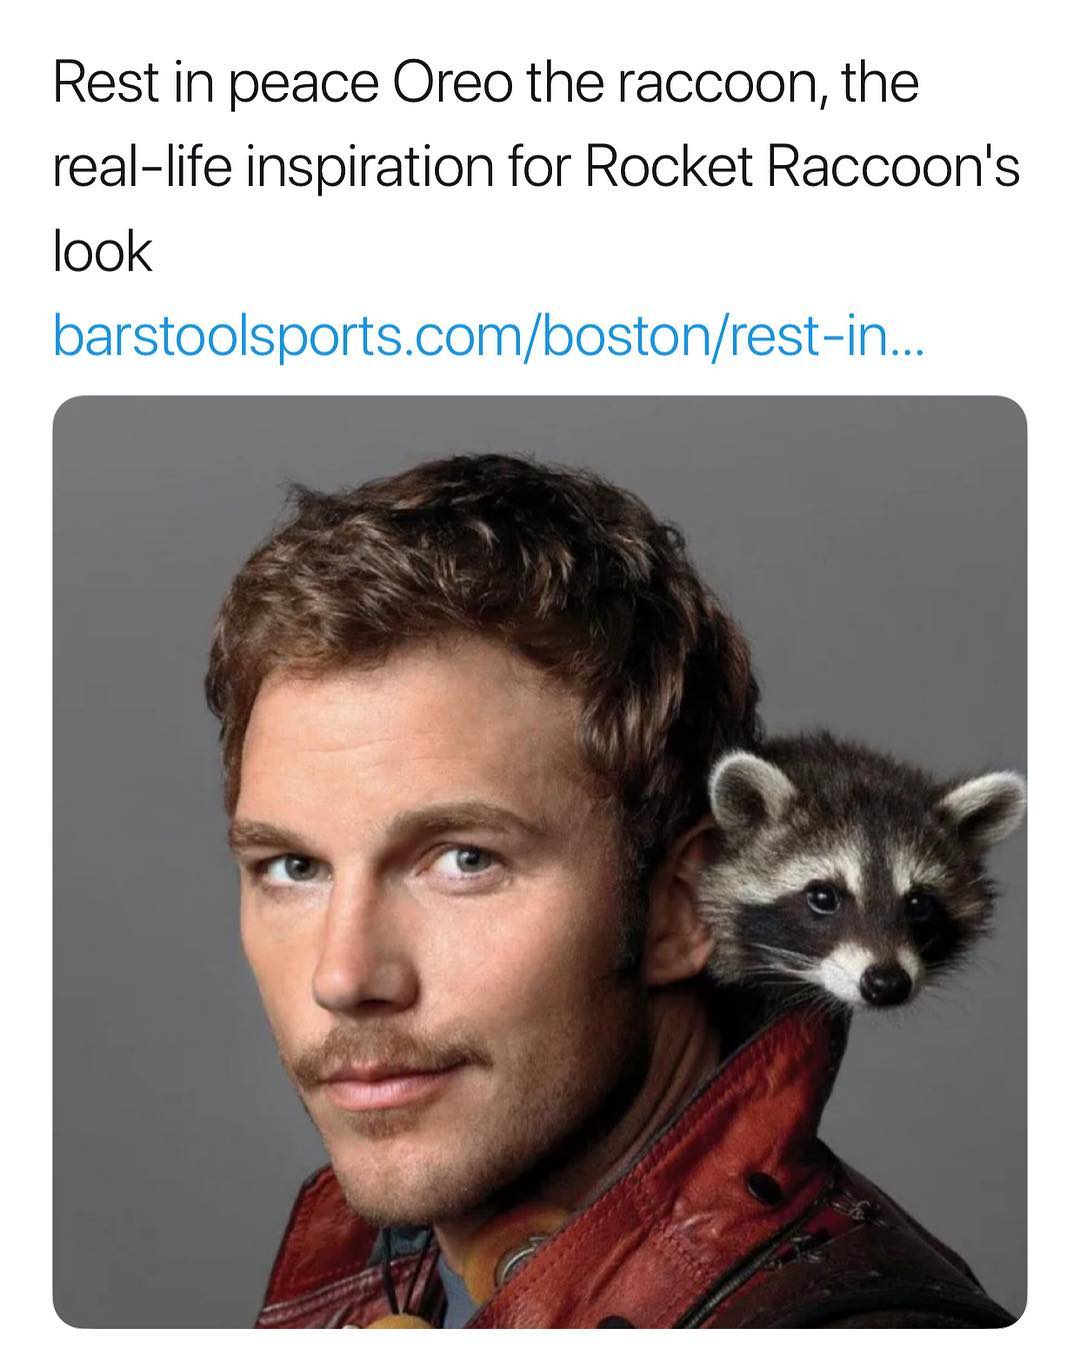 Rest in peace Oreo the raccoon, the real-life inspiration for Rocket Raccoon's look.